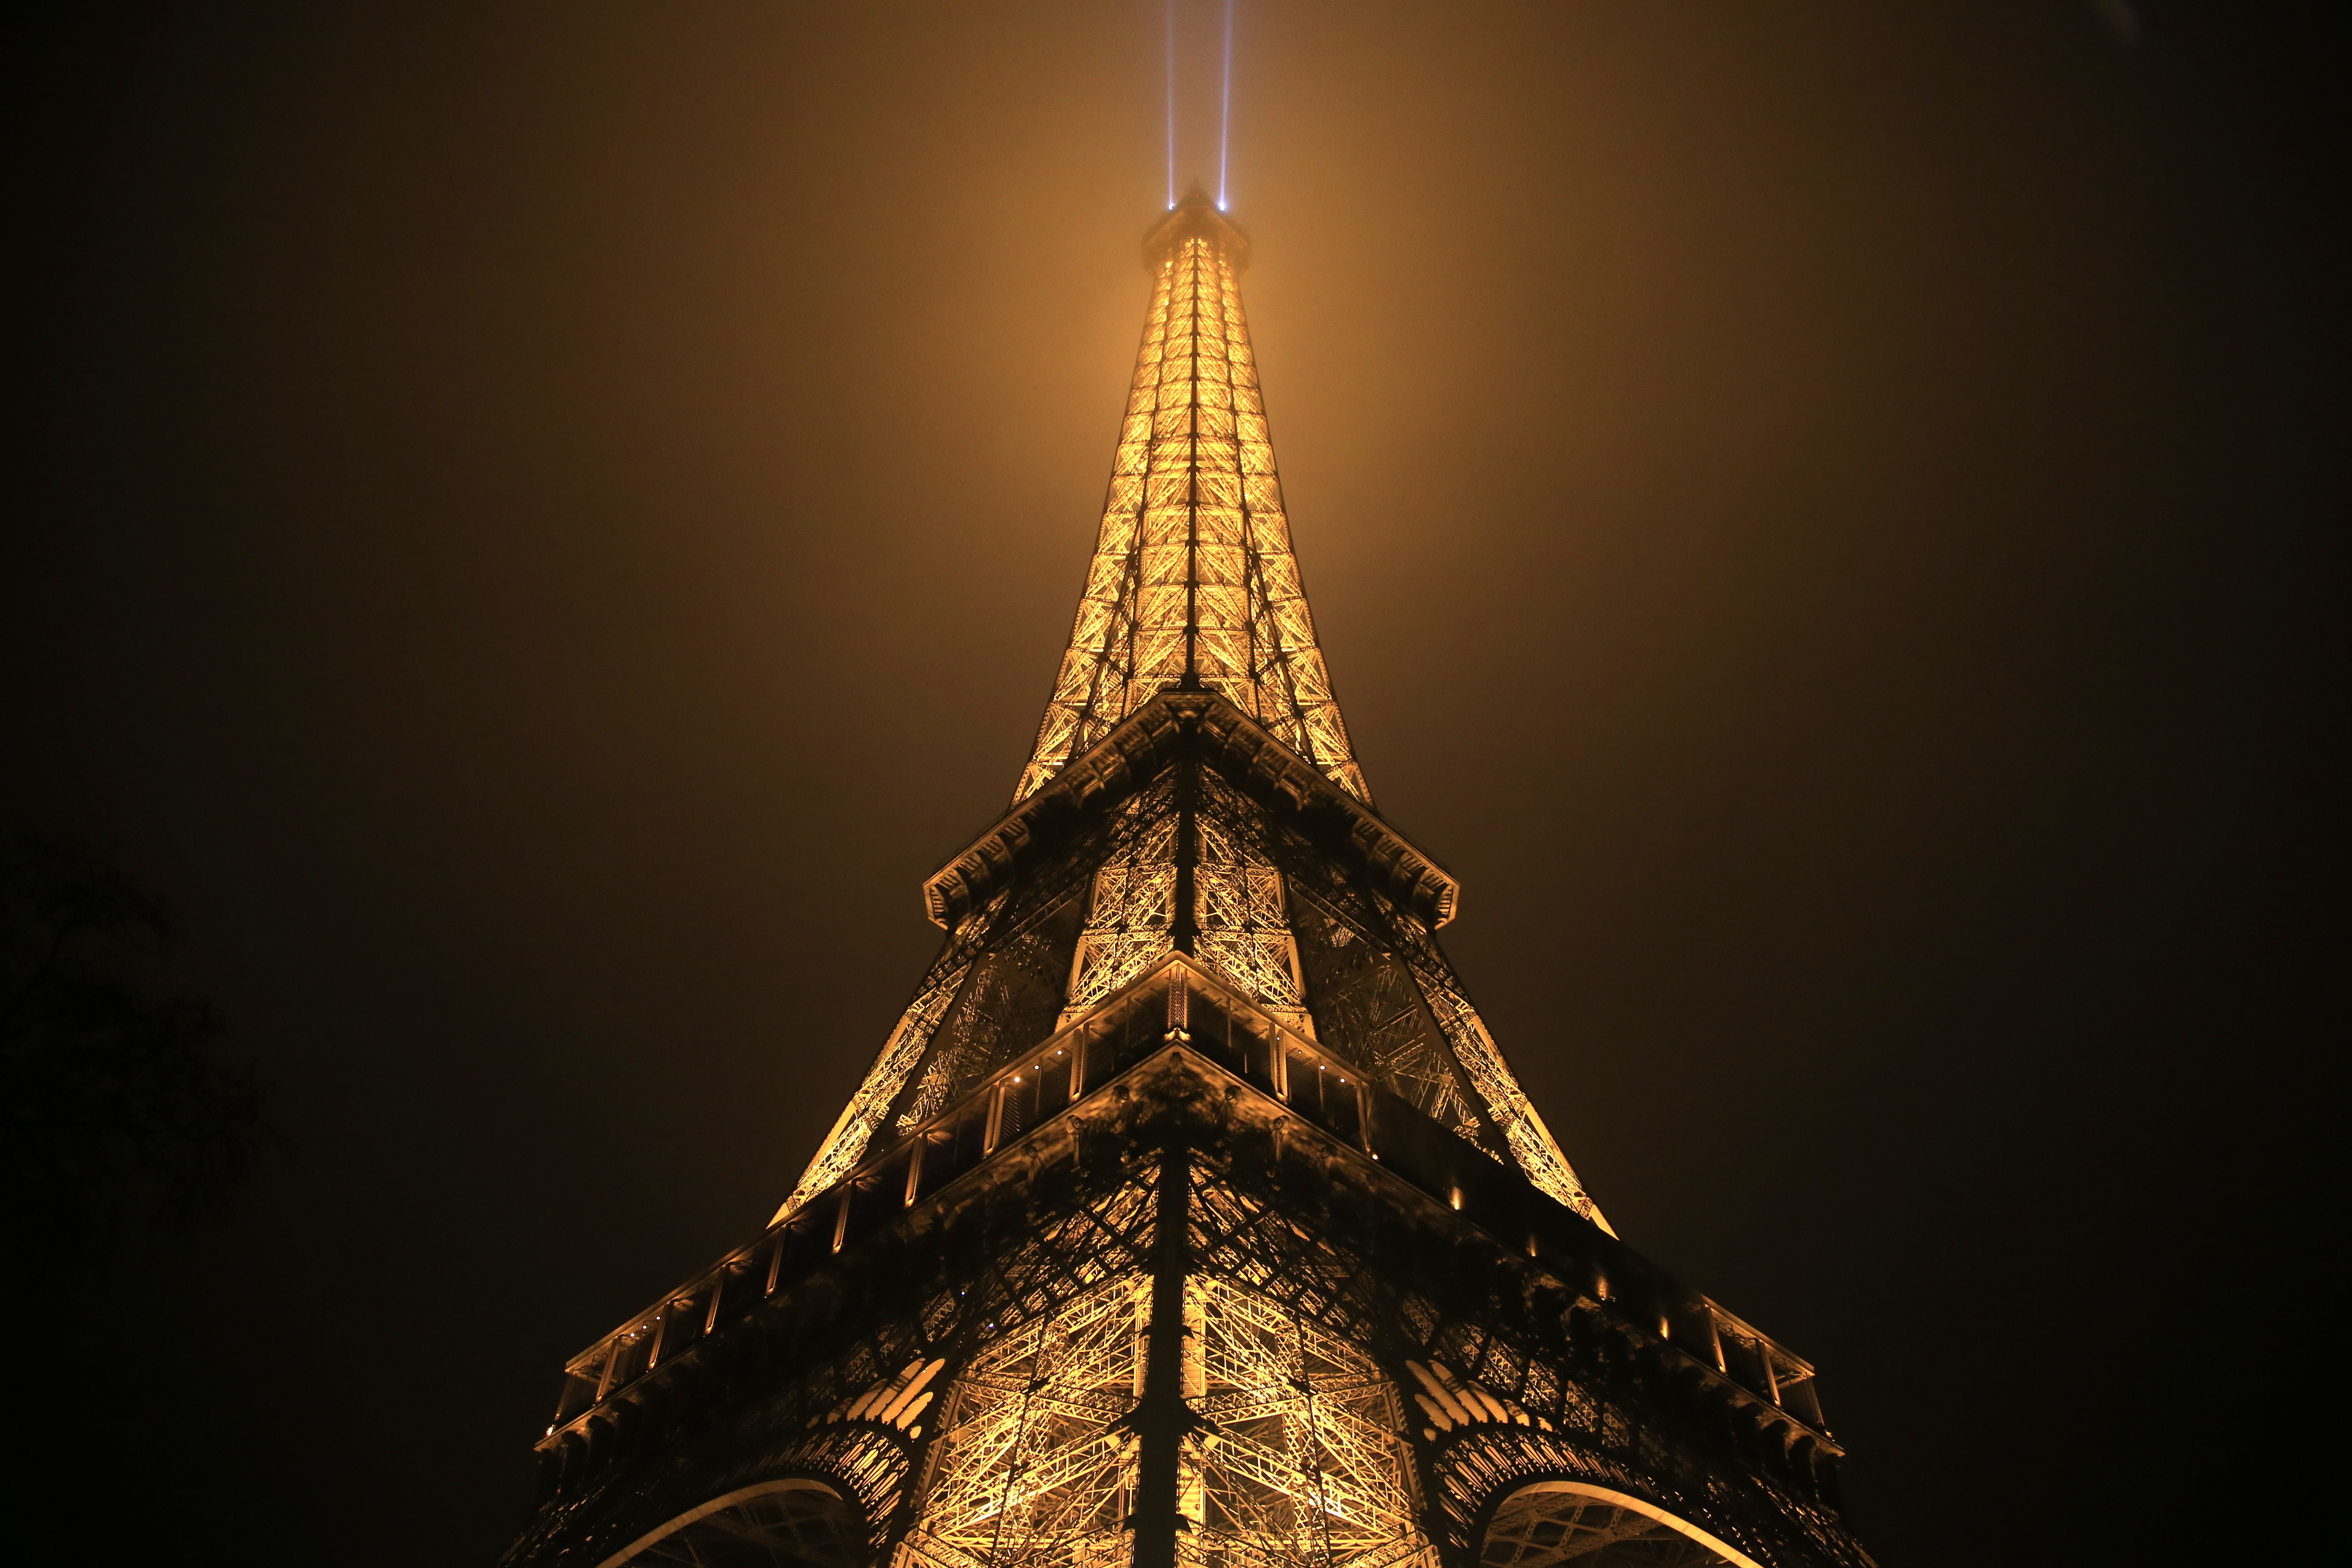 Banned! Taking pictures of the Eiffel Tower at night – POLITICO